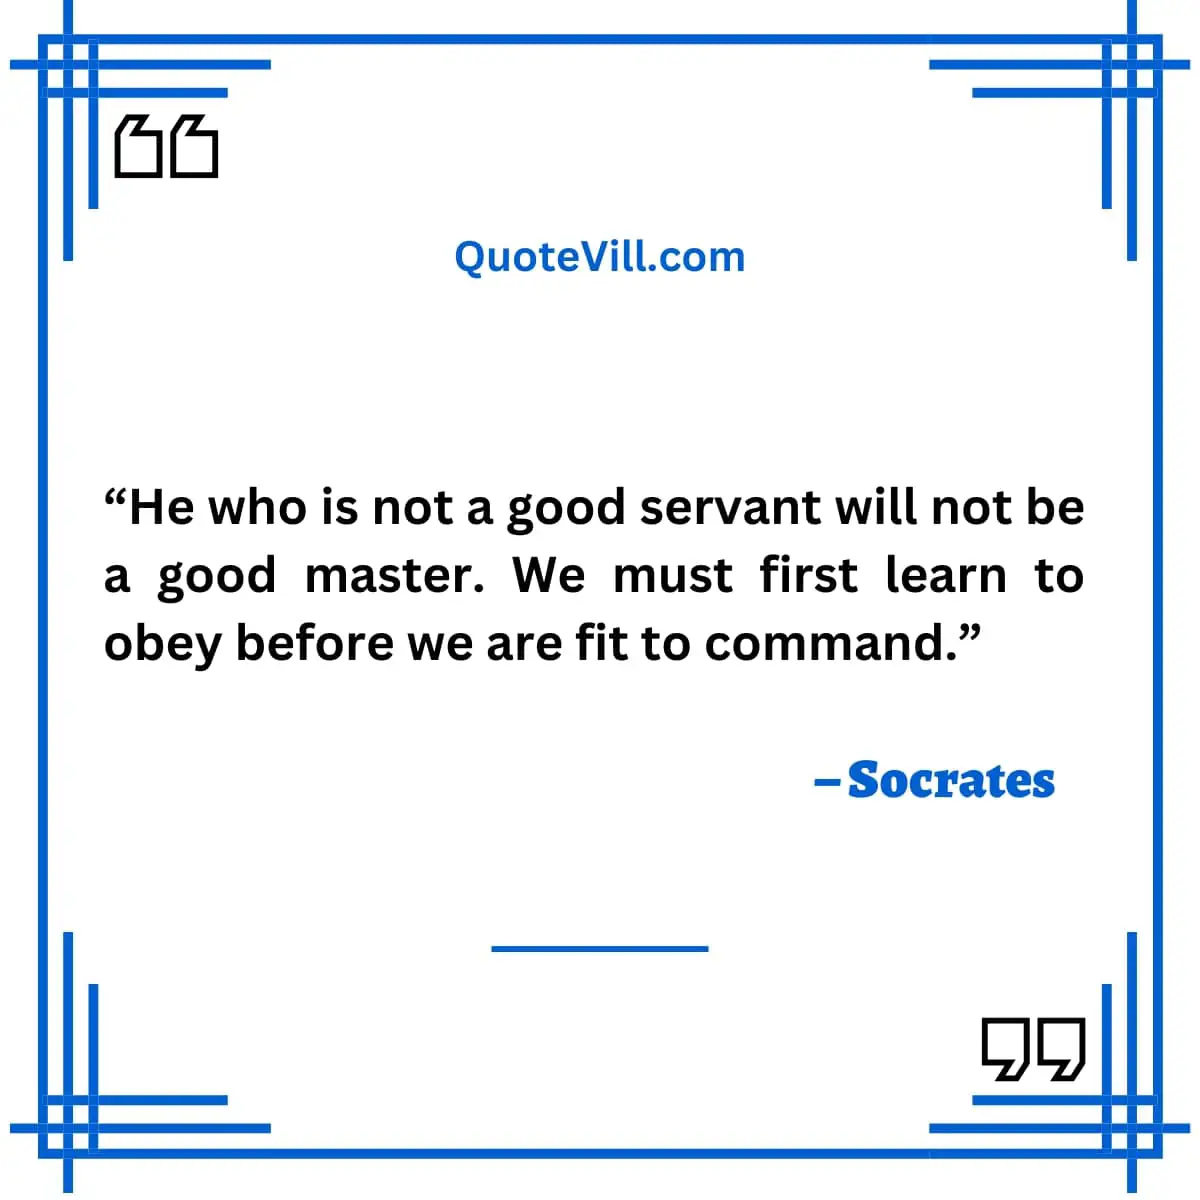 Socrates Quotes On Virtues and Ethics